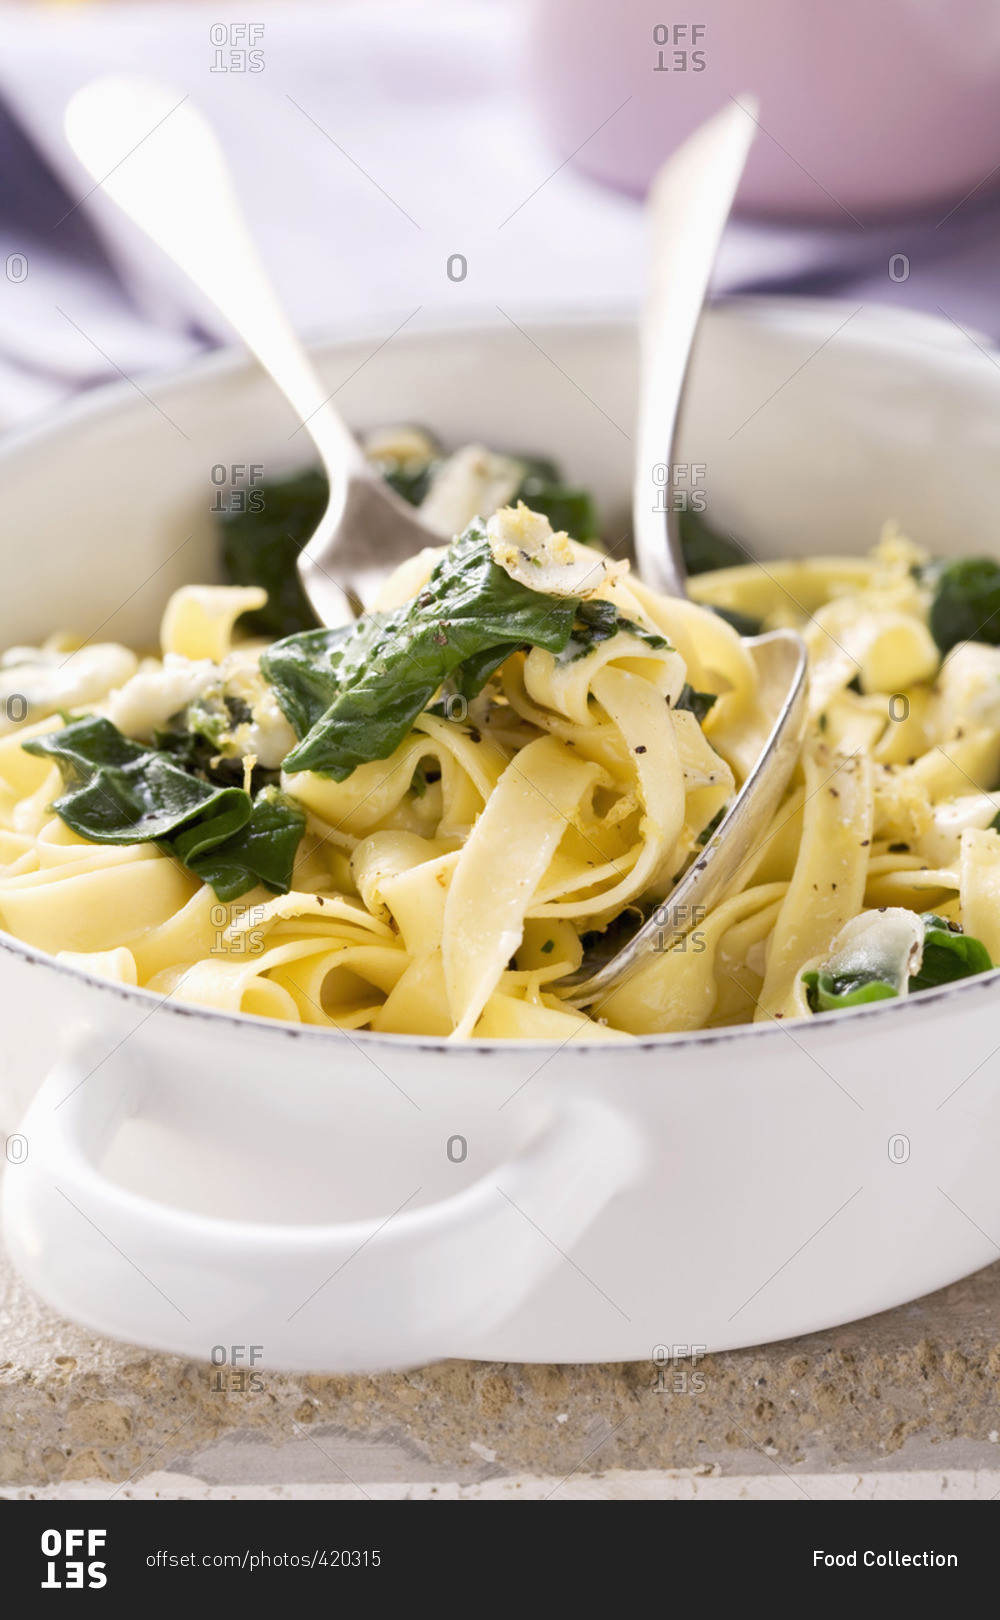 Tagliatelle with spring spinach and cheese